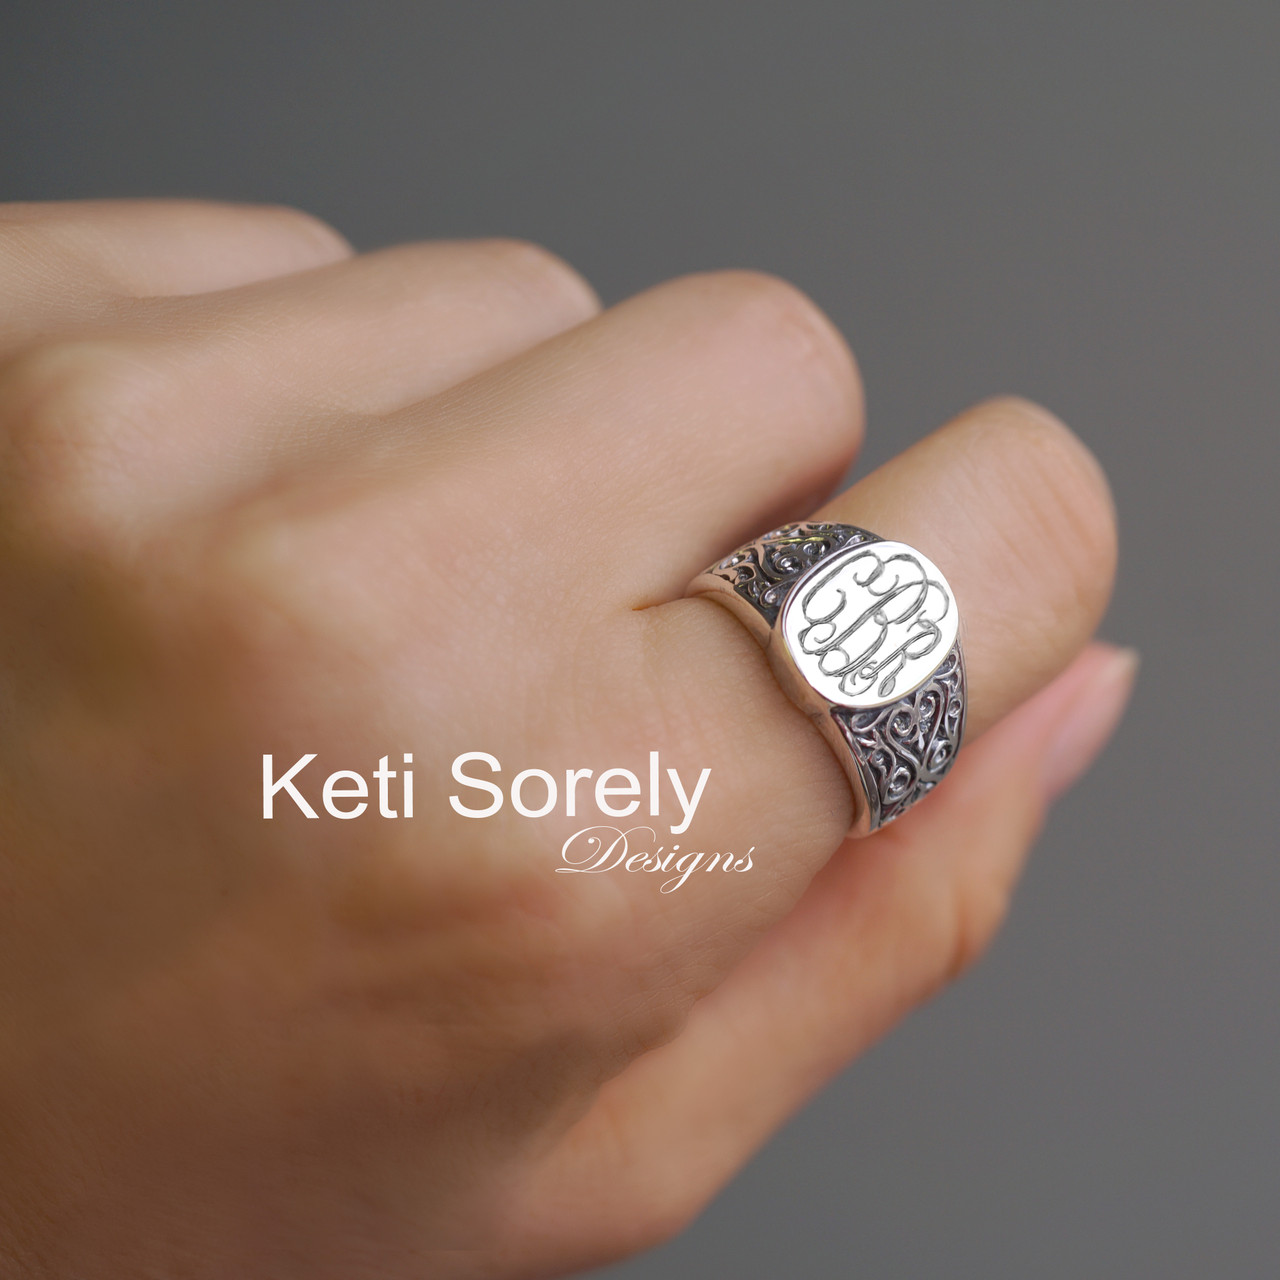 Personalized oval signet ring with swirly ornaments and engraved monogrammed  Initials - available in Sterling Silver, 10K gold, 14K gold or 18K gold